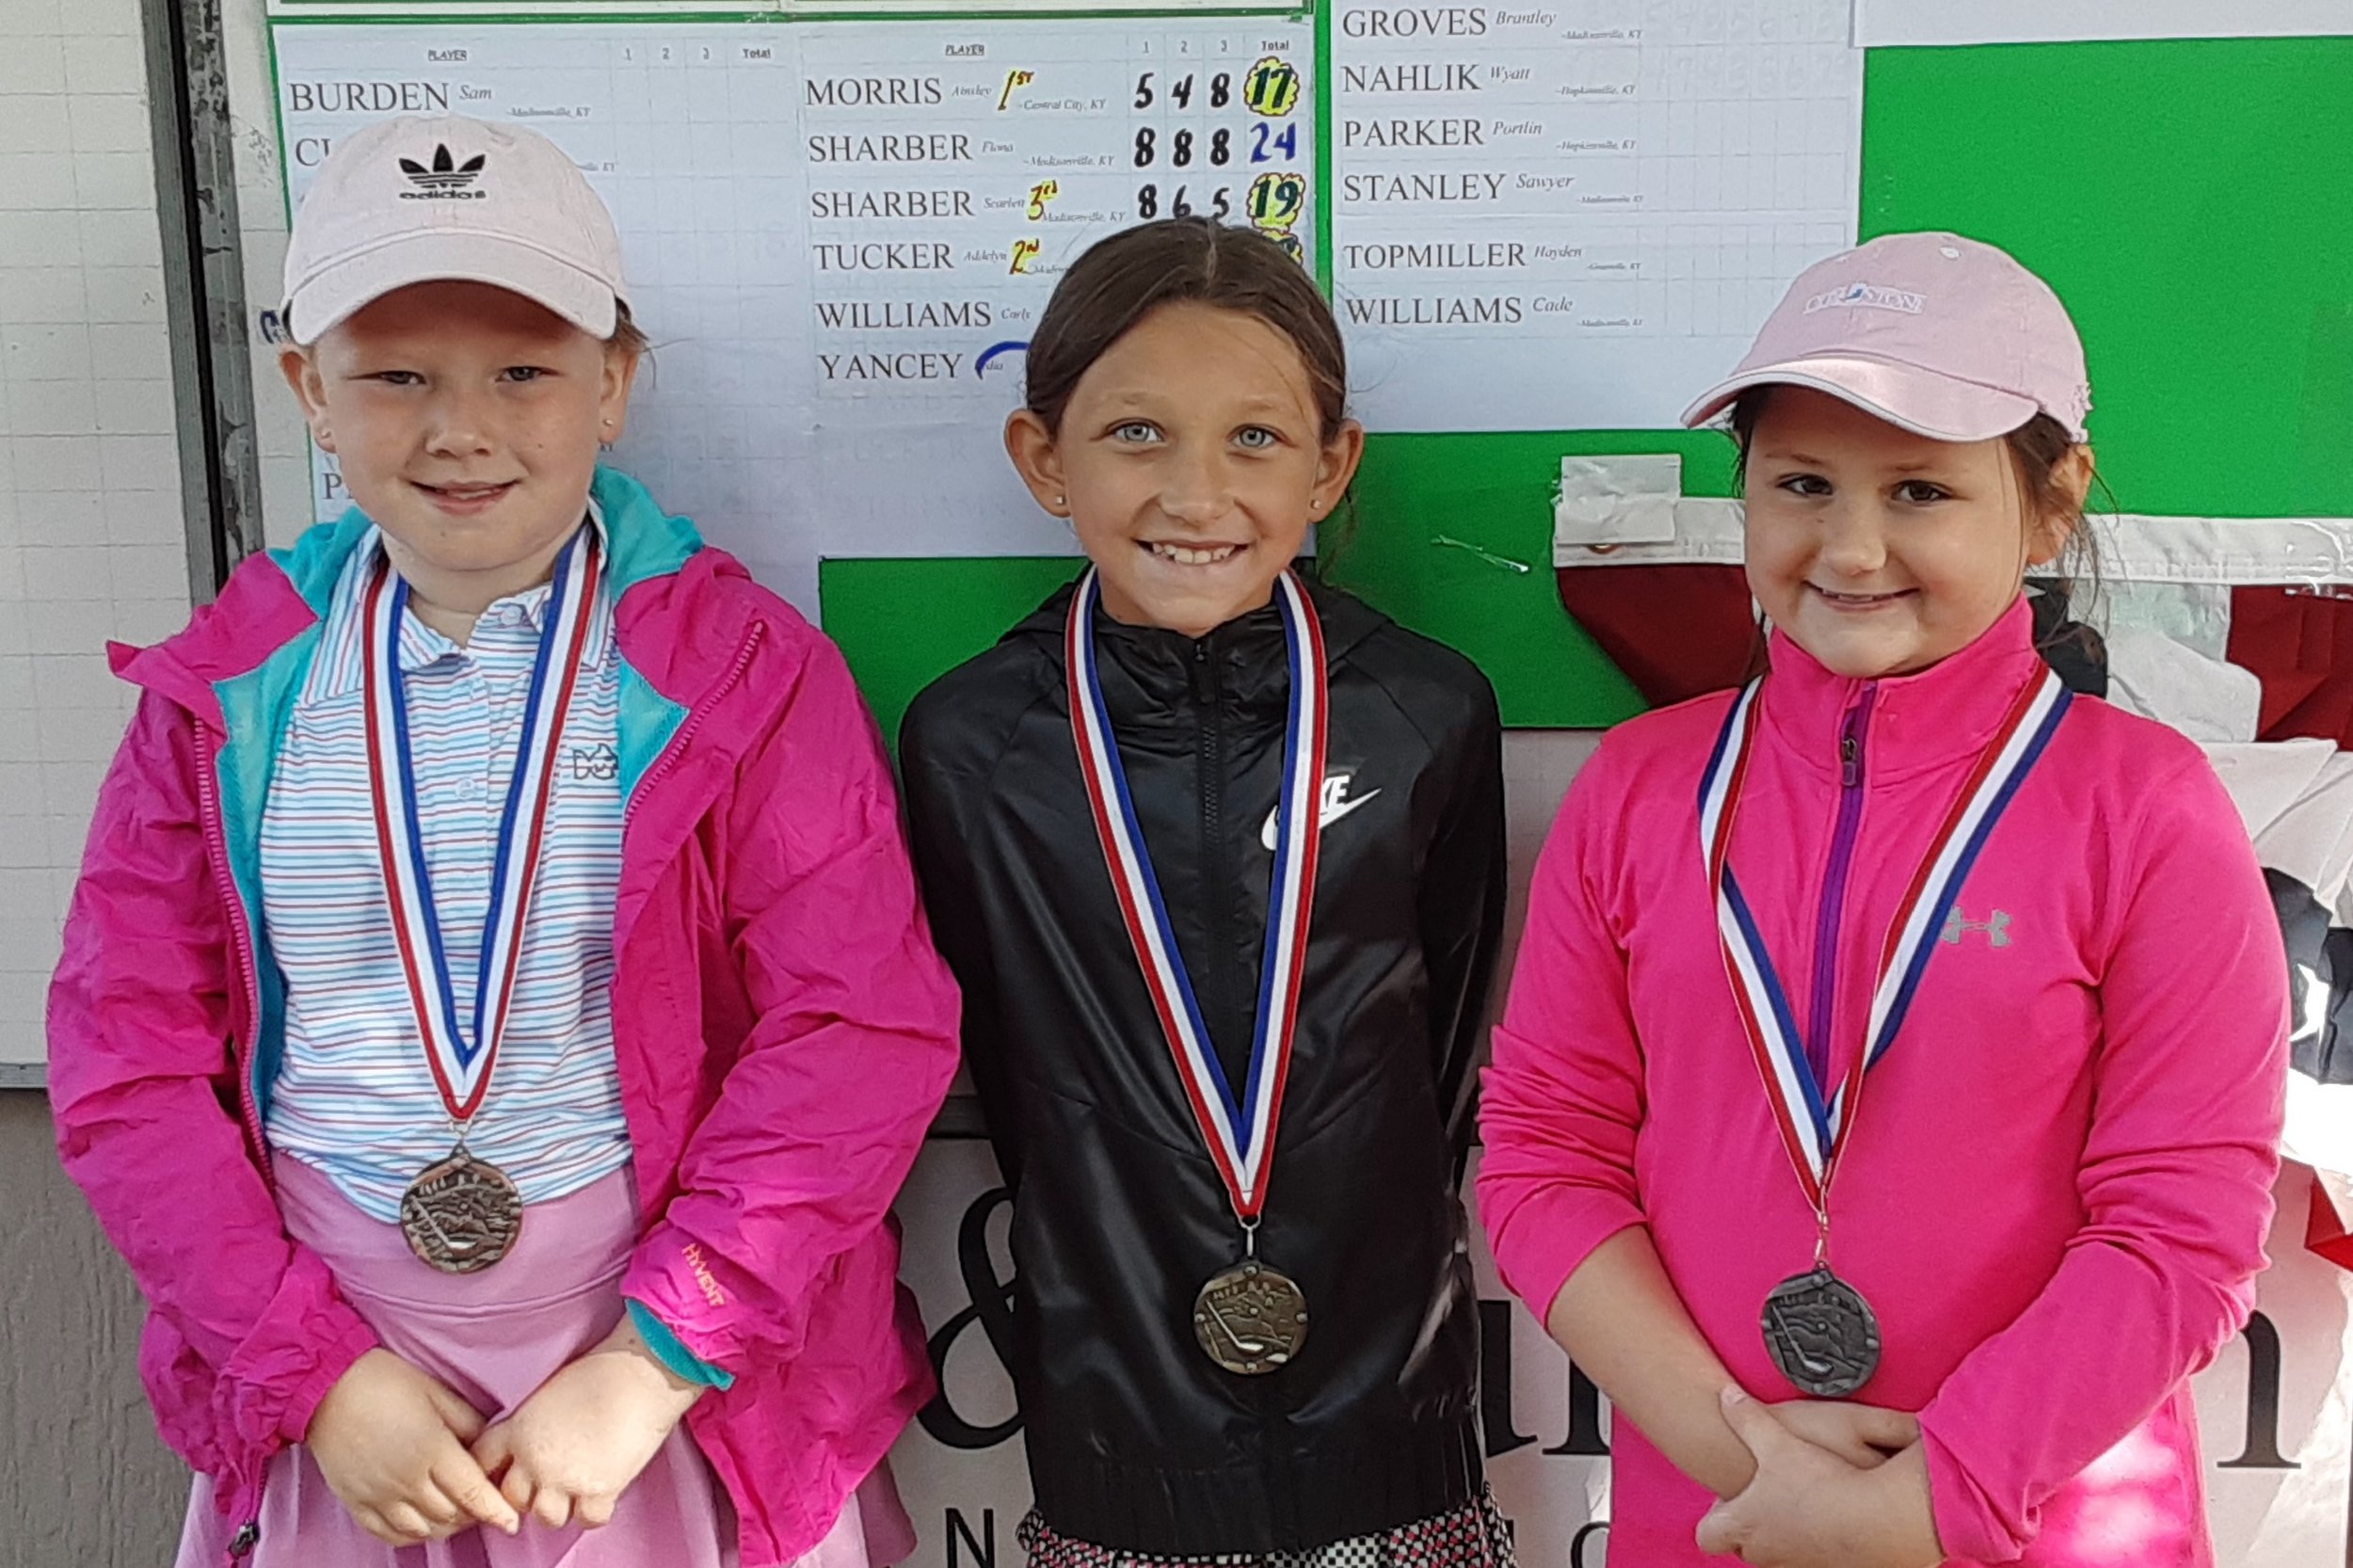  WELCOME TO THE 19TH ANNUAL   GO JUNIOR GOLF SERIES!  DEADLINE TO ENTER THE                 BRIDGES &amp; LAKESHORE EVENTS:  11:59PM - SATURDAY, MAY 25, 2024 